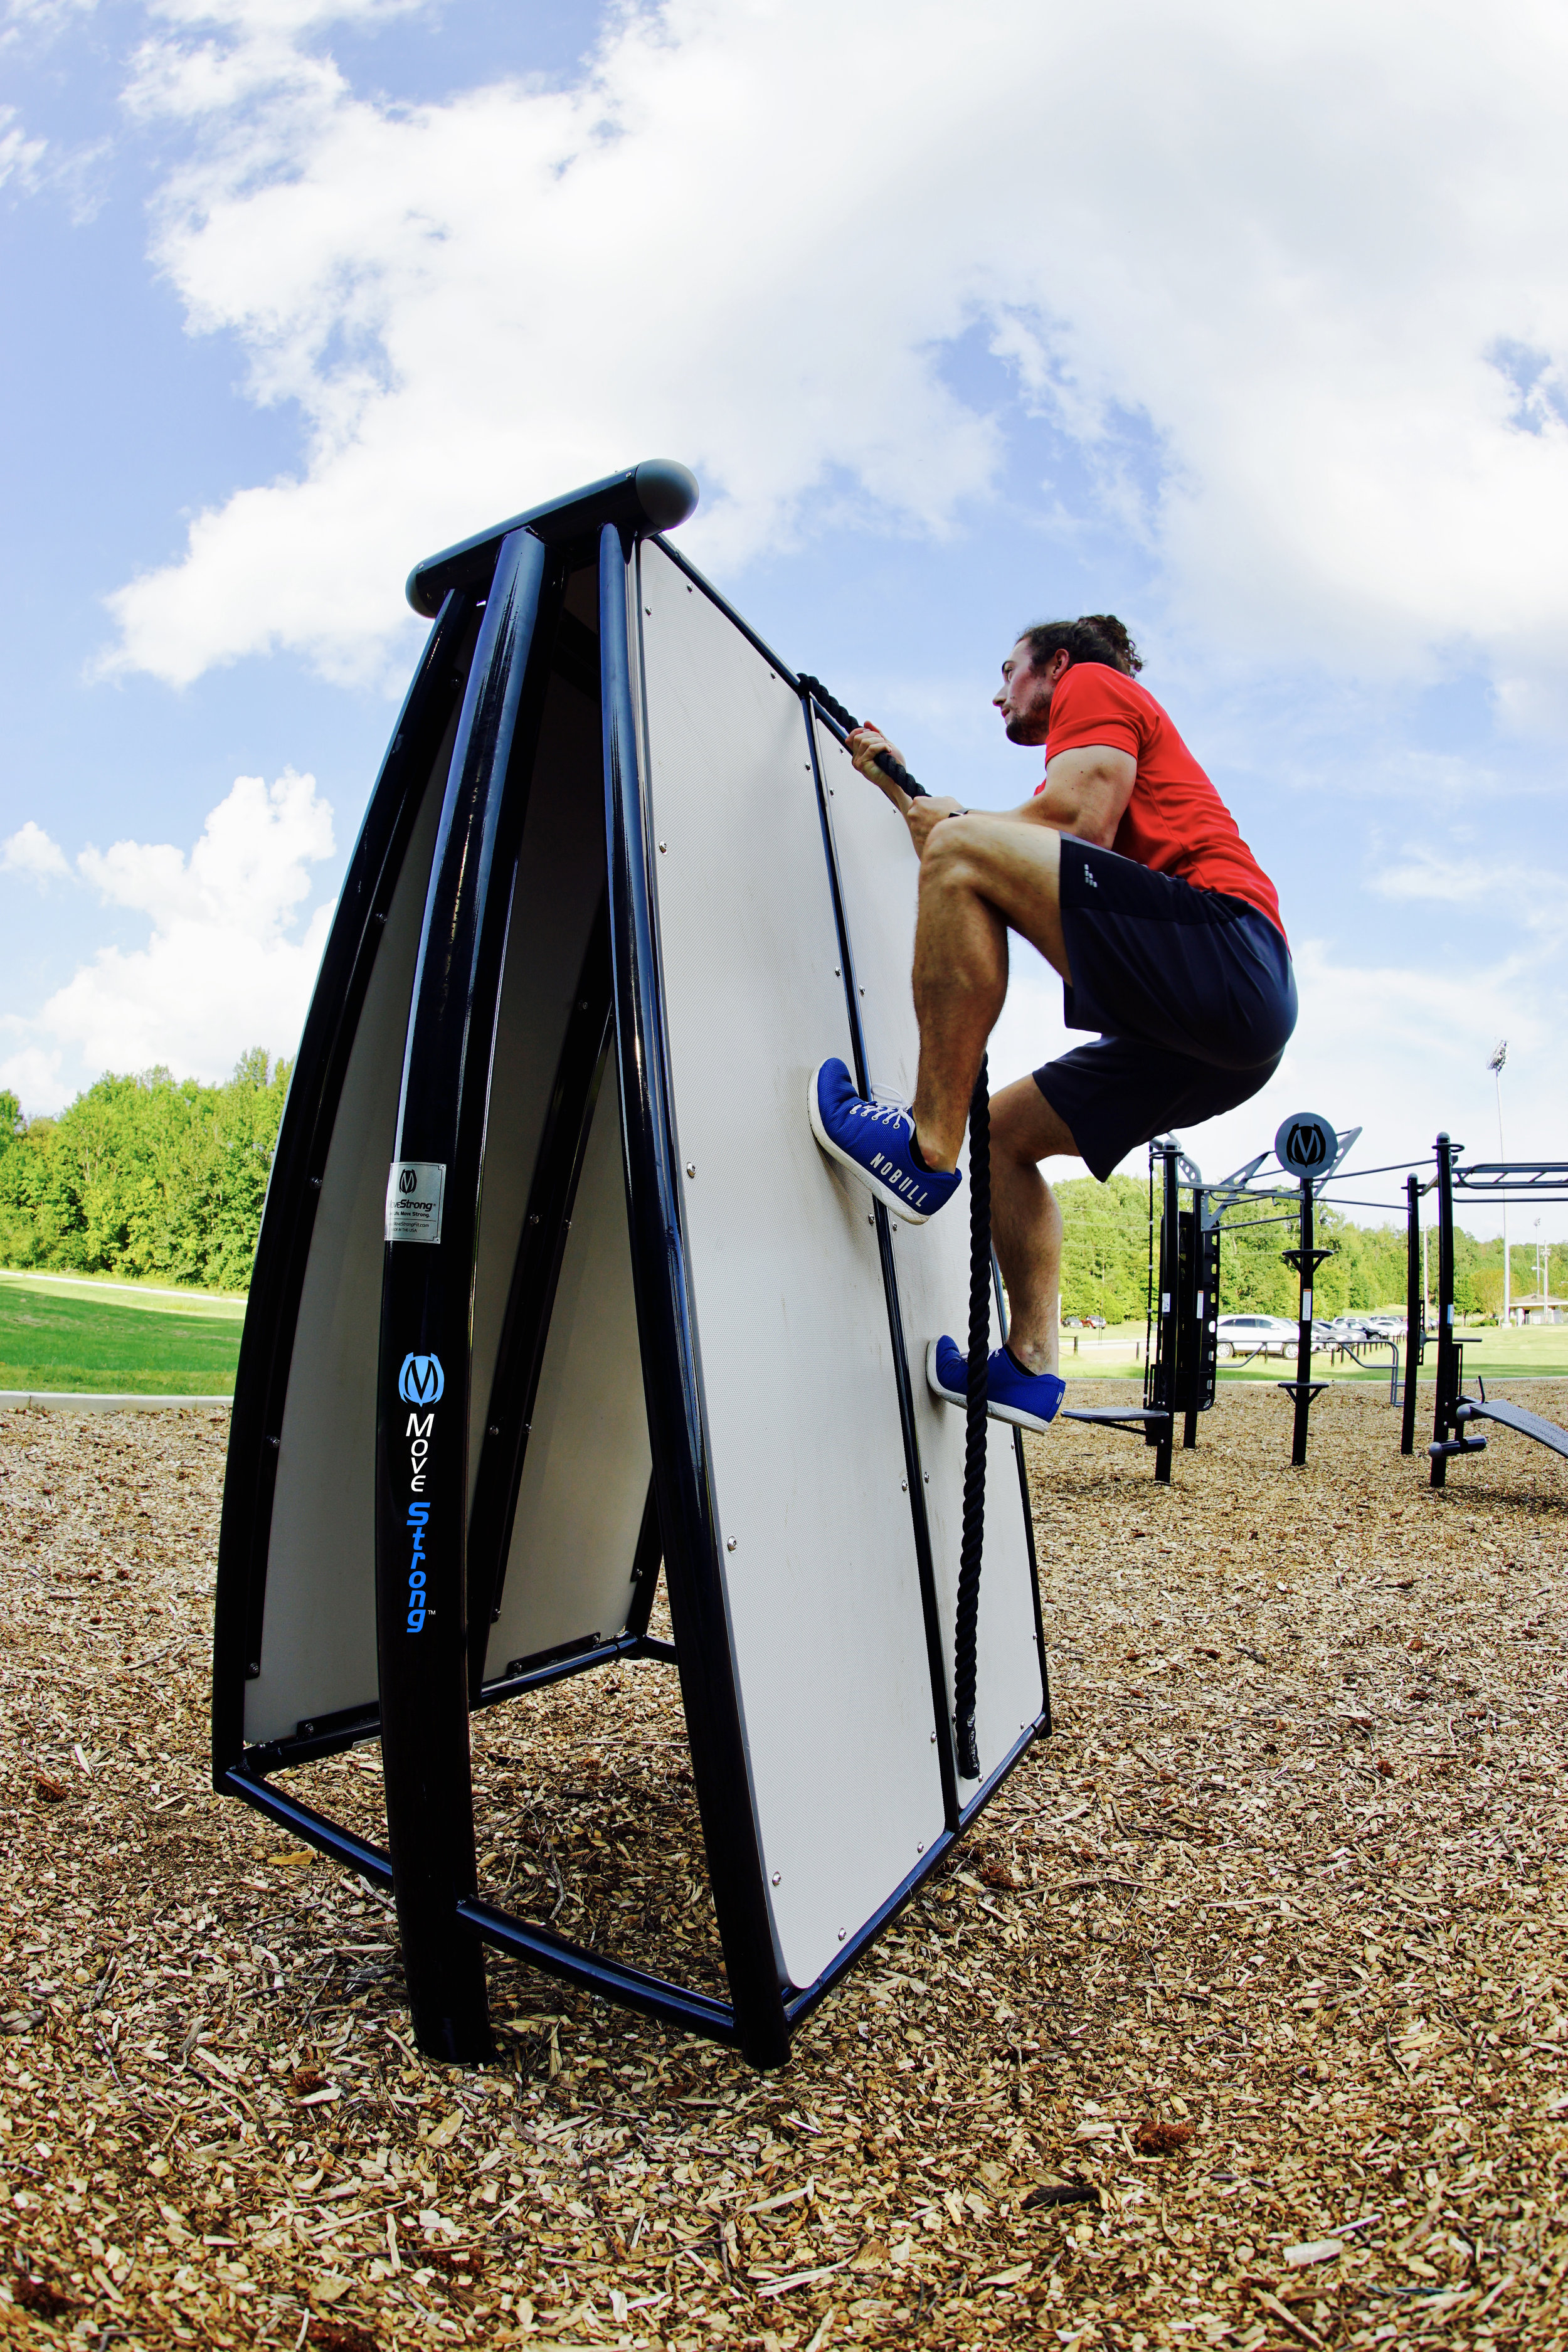 A-Wall Climber Obstacle Course